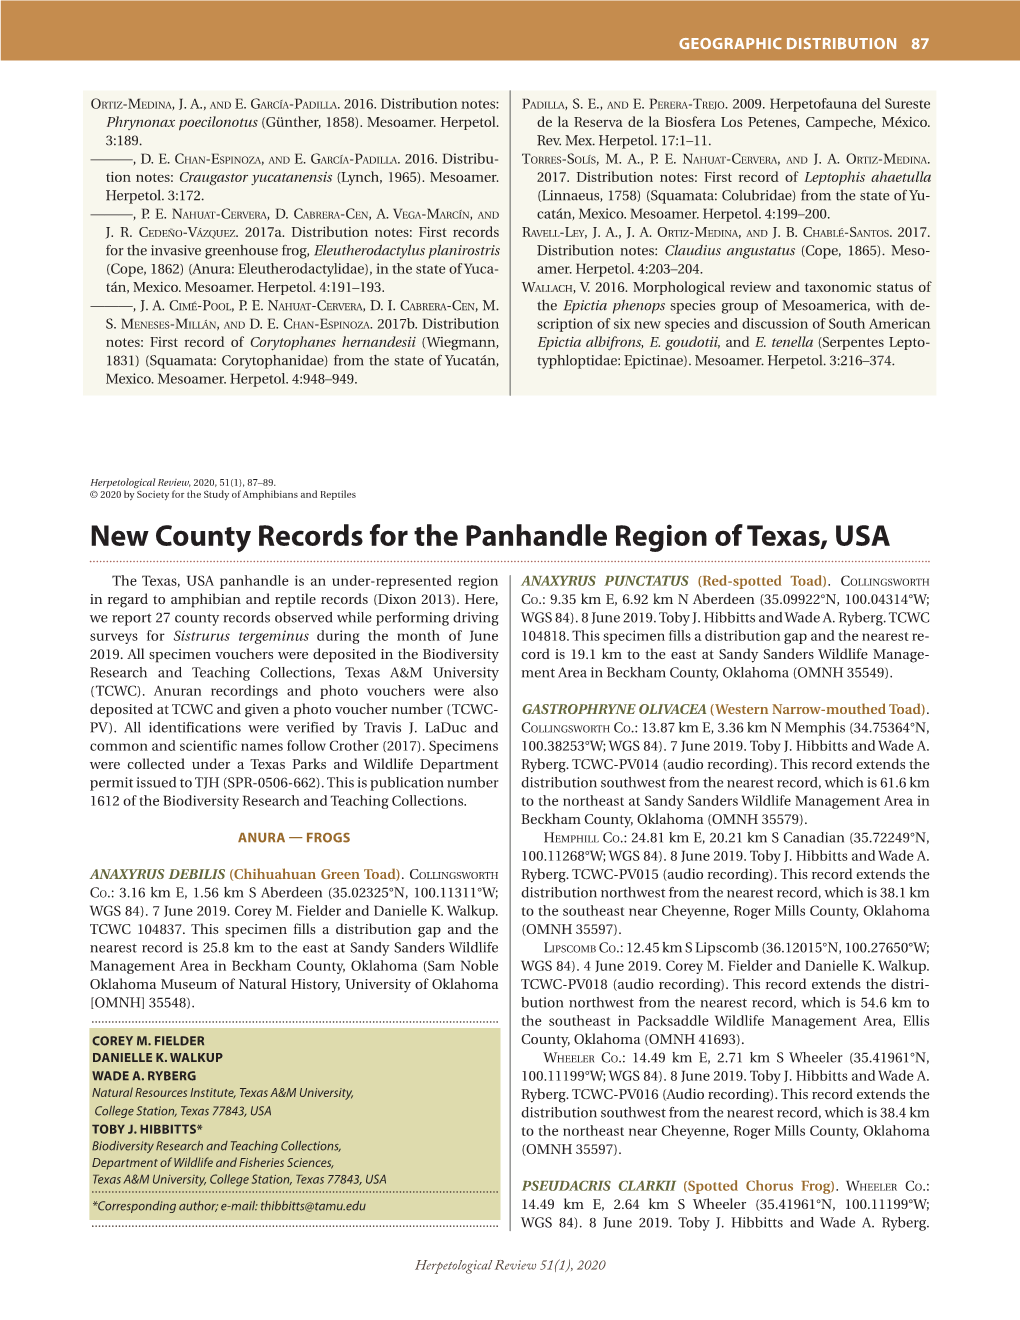 New County Records for the Panhandle Region of Texas, USA